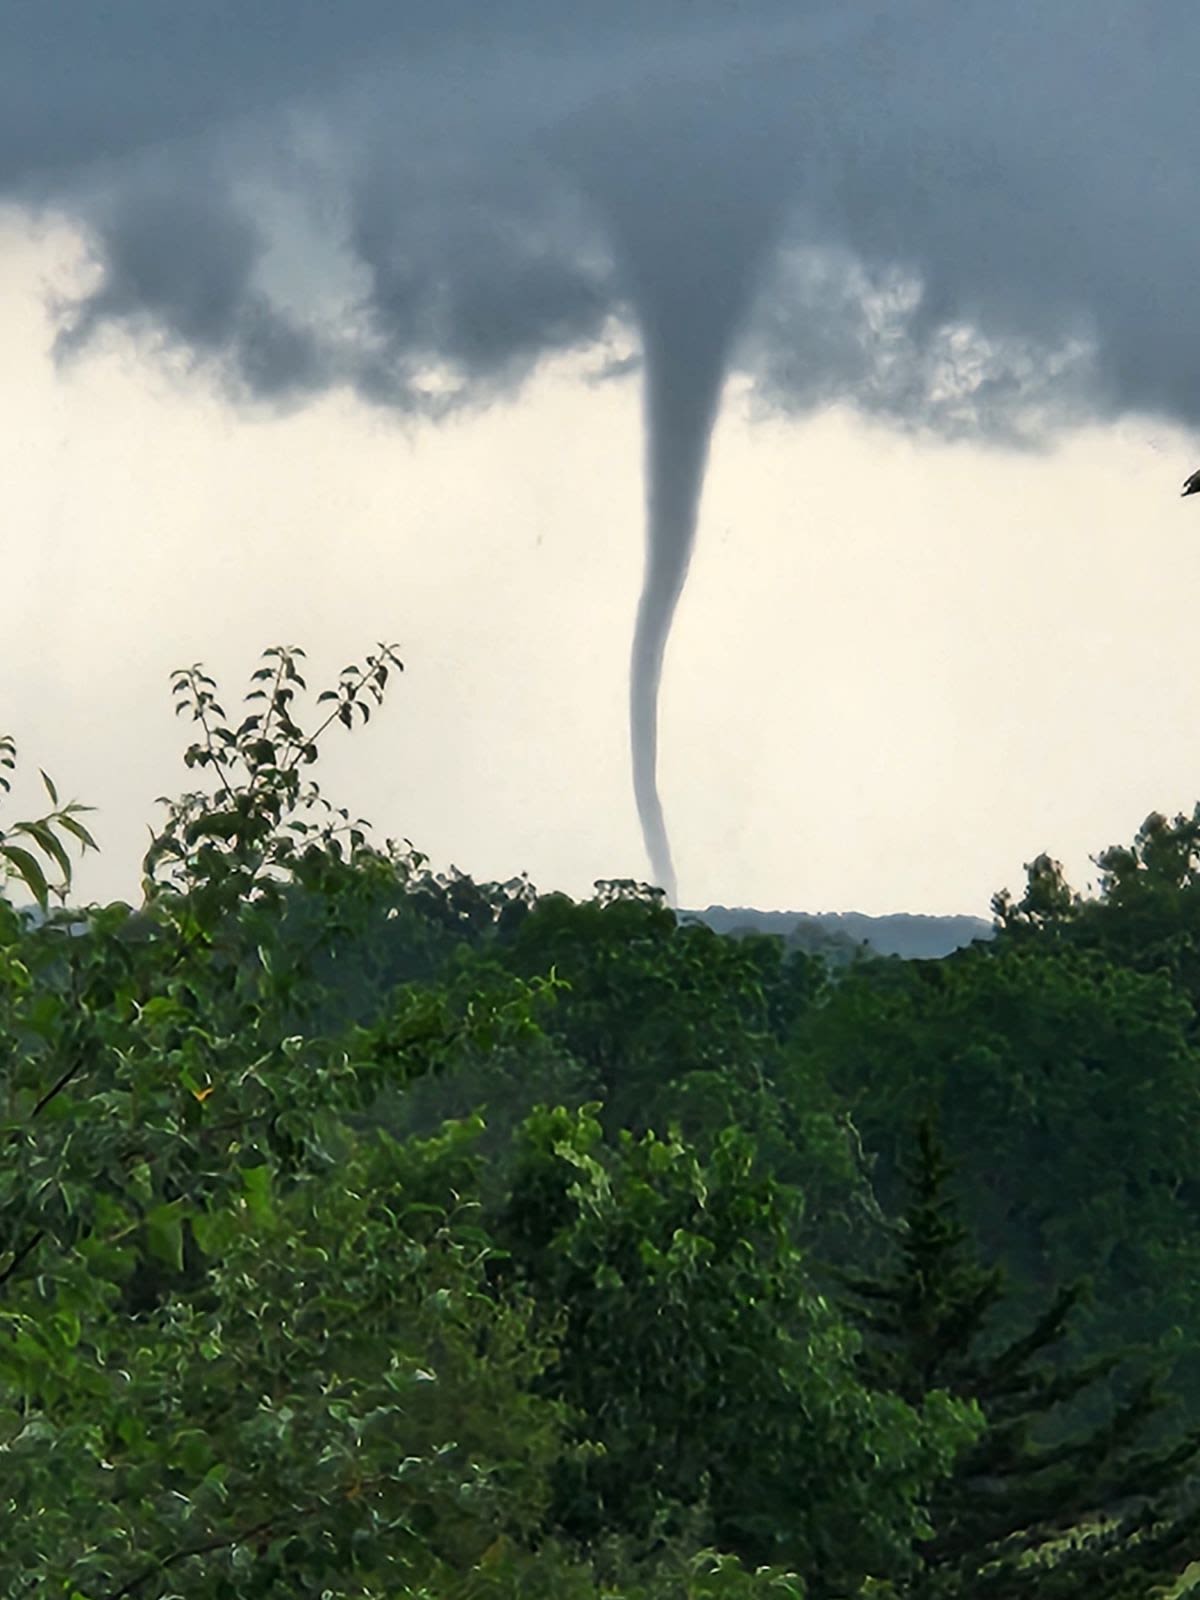 NWS confirms multiple EF-3 tornadoes in Ozarks Sunday